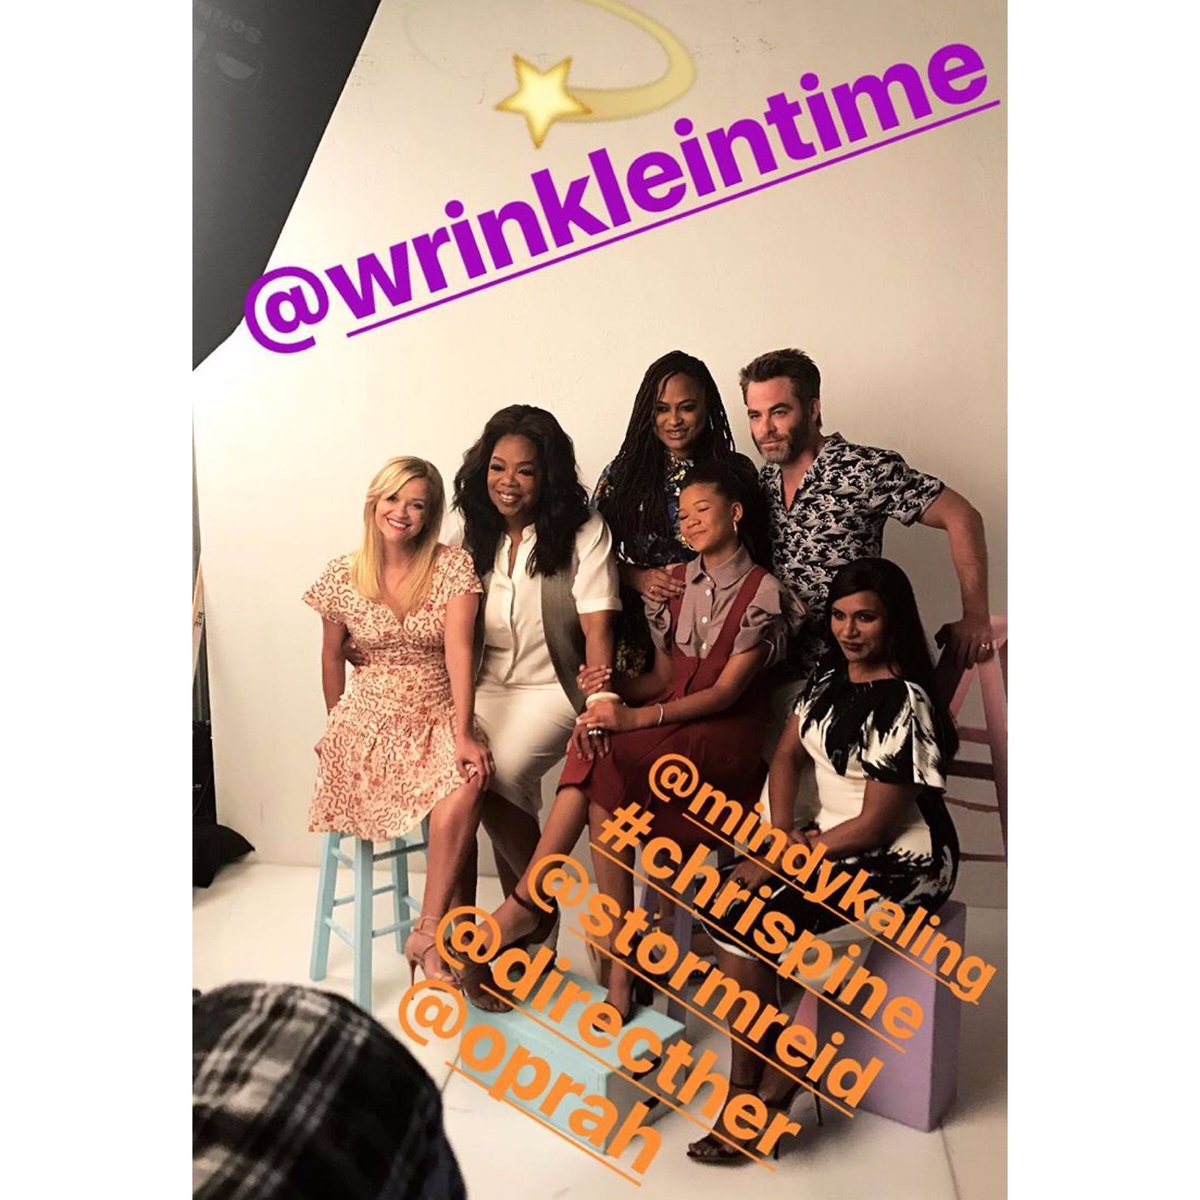 #WrinkleinTime cast and @ava! (@RWitherspoon gets all the good pictures) https://t.co/AsSqbznwDt